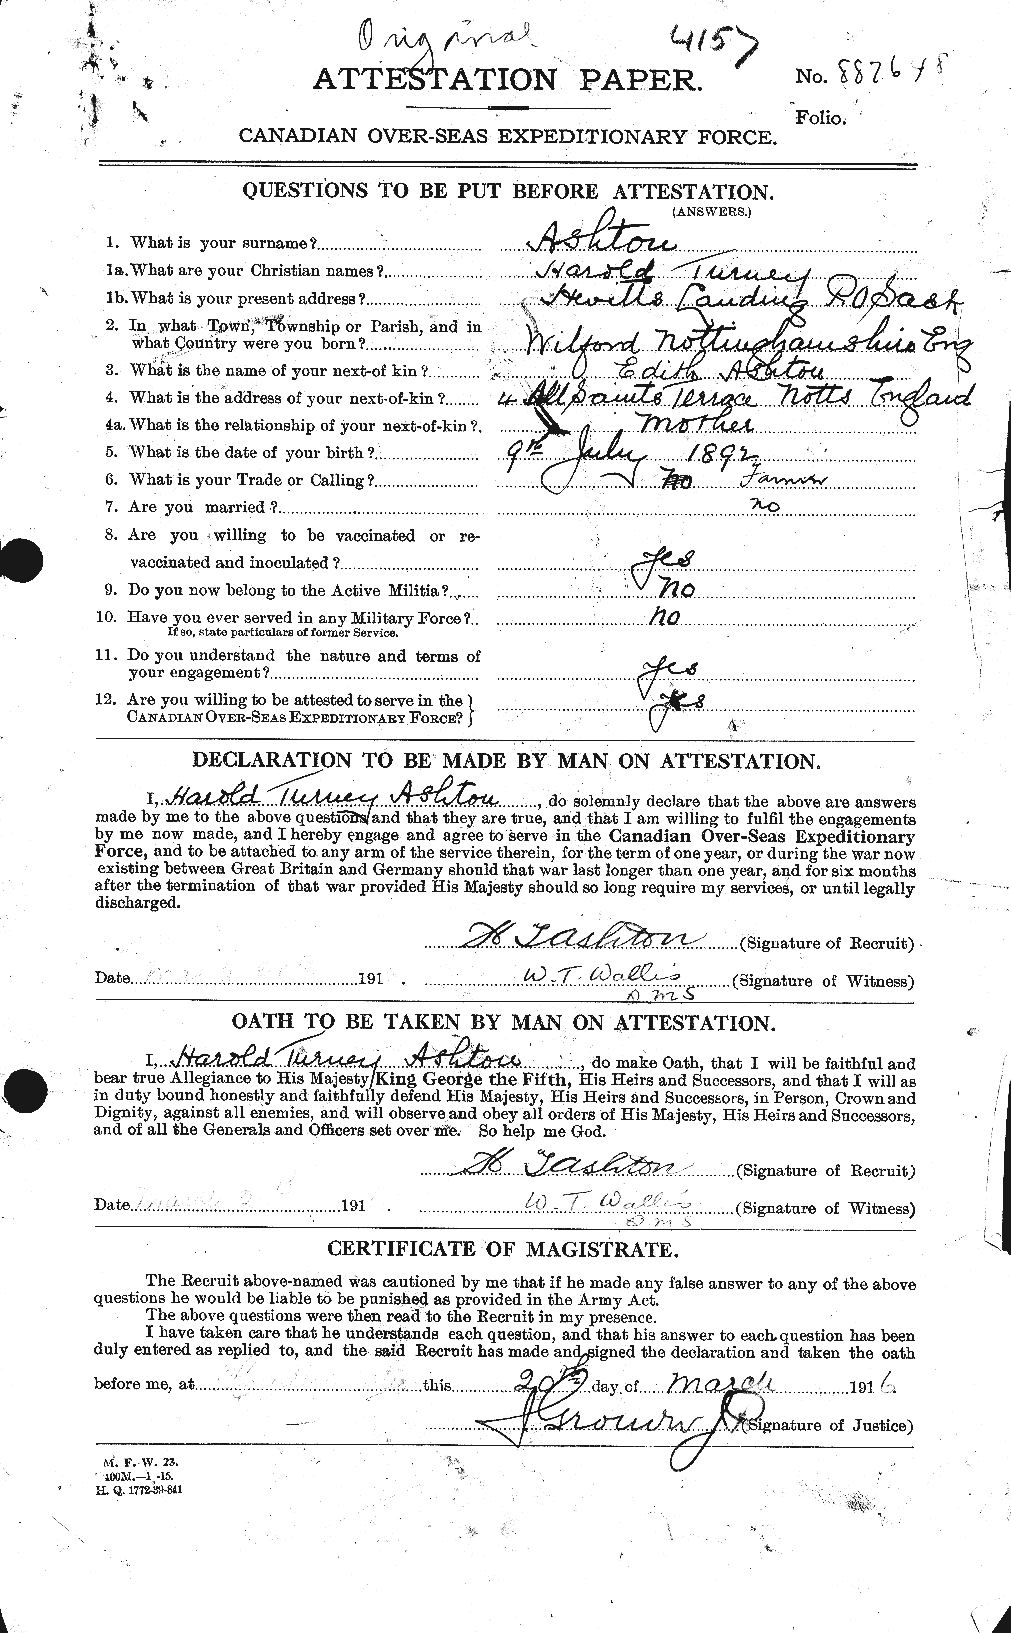 Personnel Records of the First World War - CEF 223062a